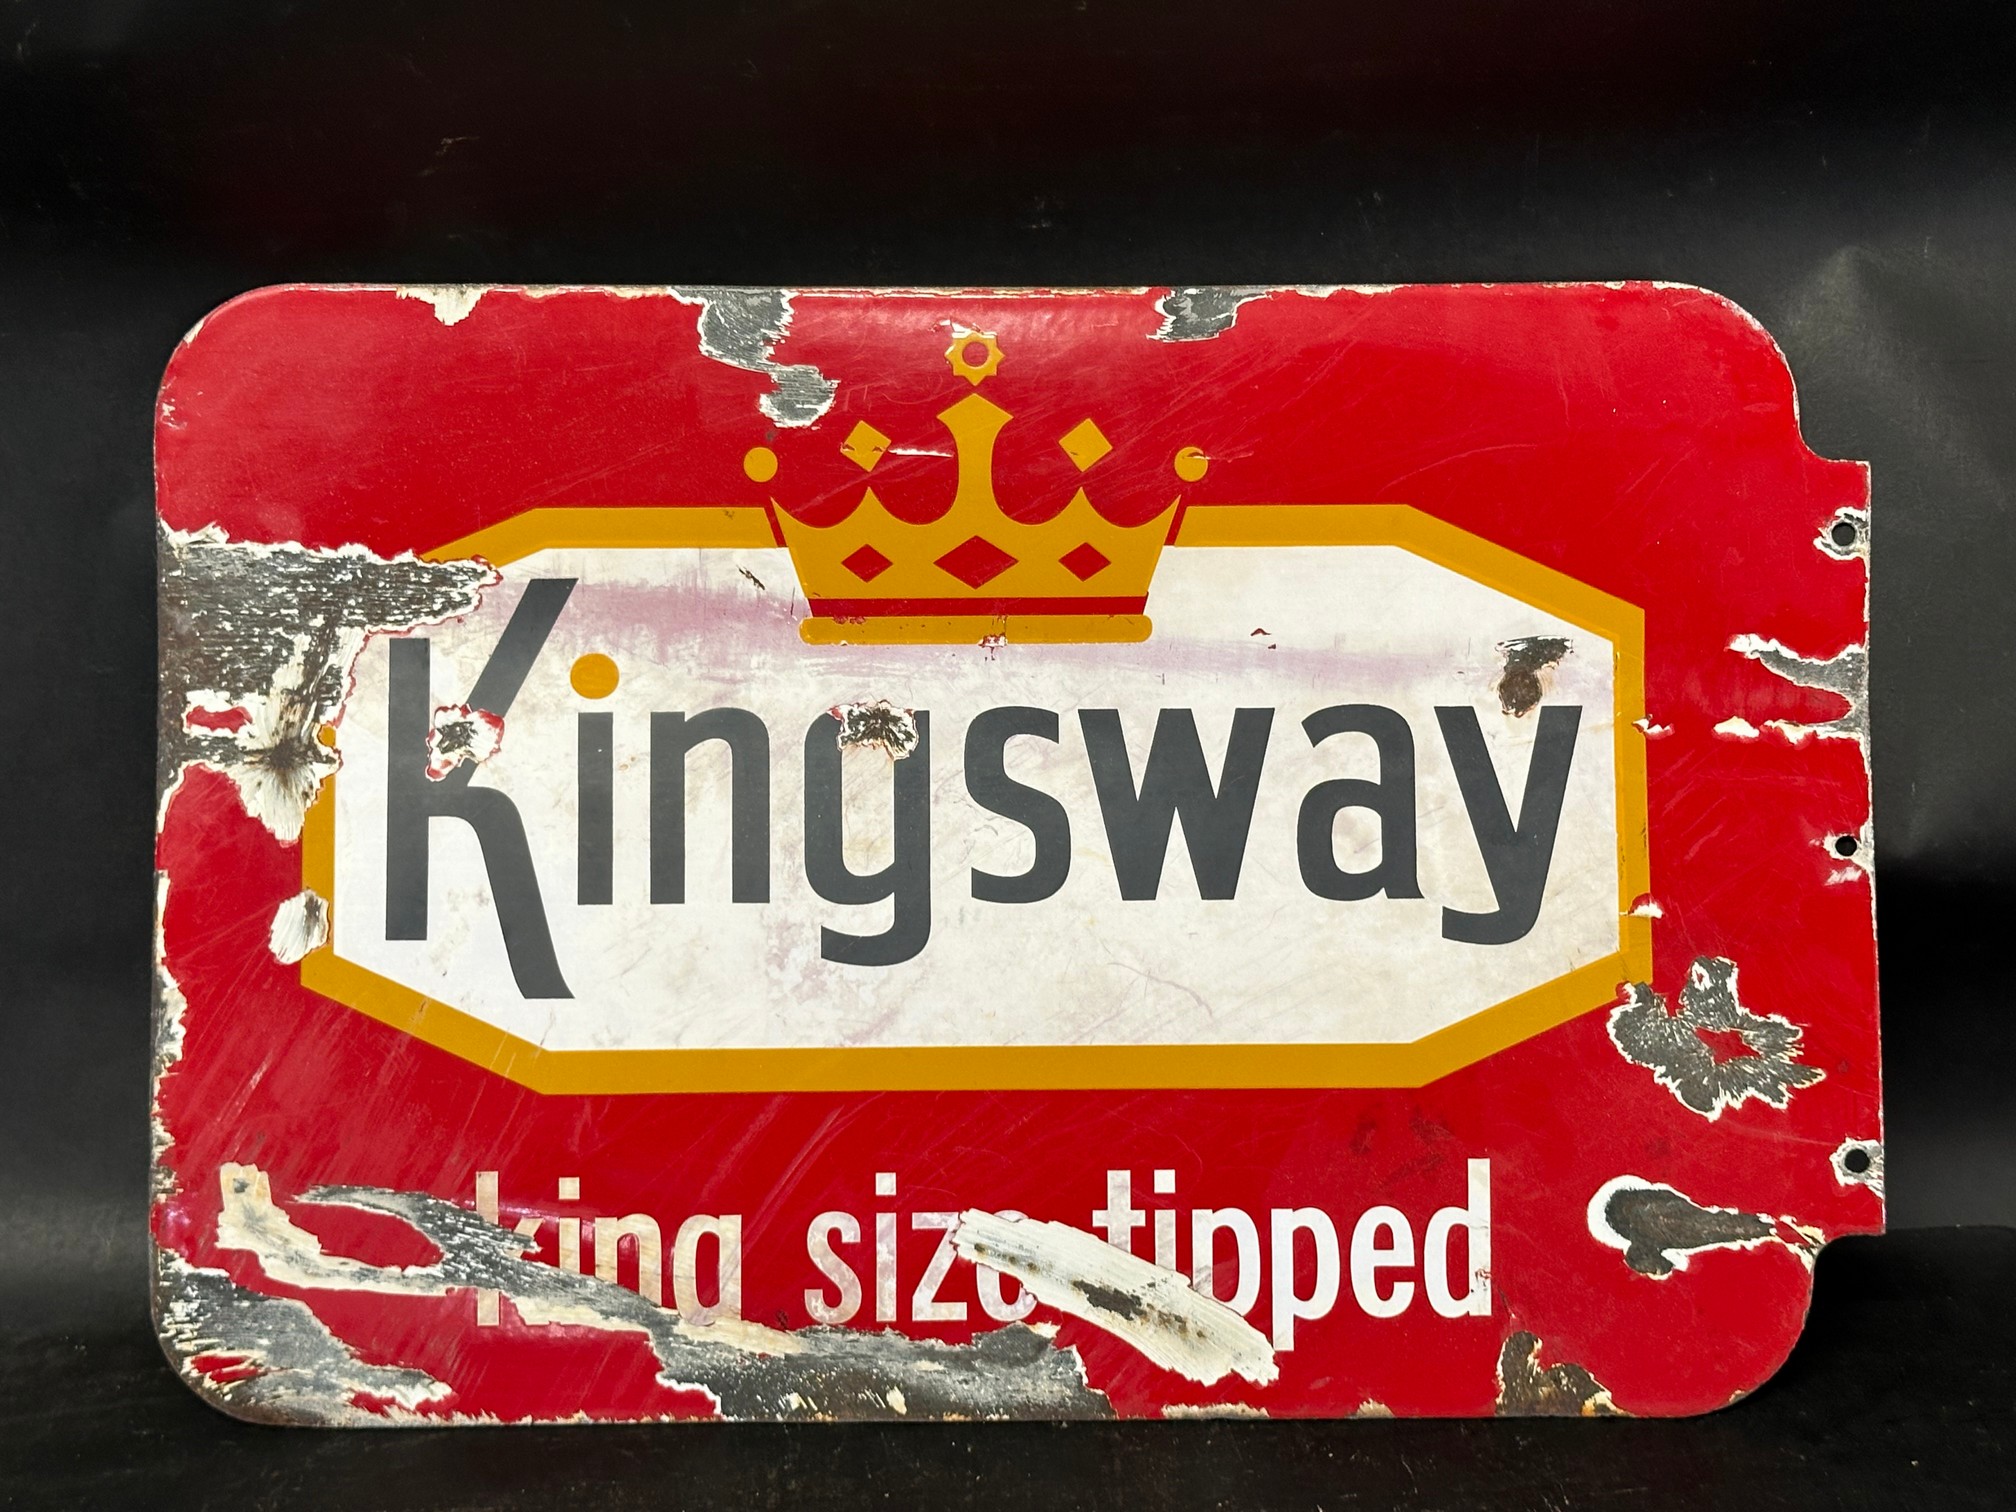 A Bristol Tipped Cigarettes and Kingsway tipped cigarettes double sided enamel advertising sign, - Image 2 of 2